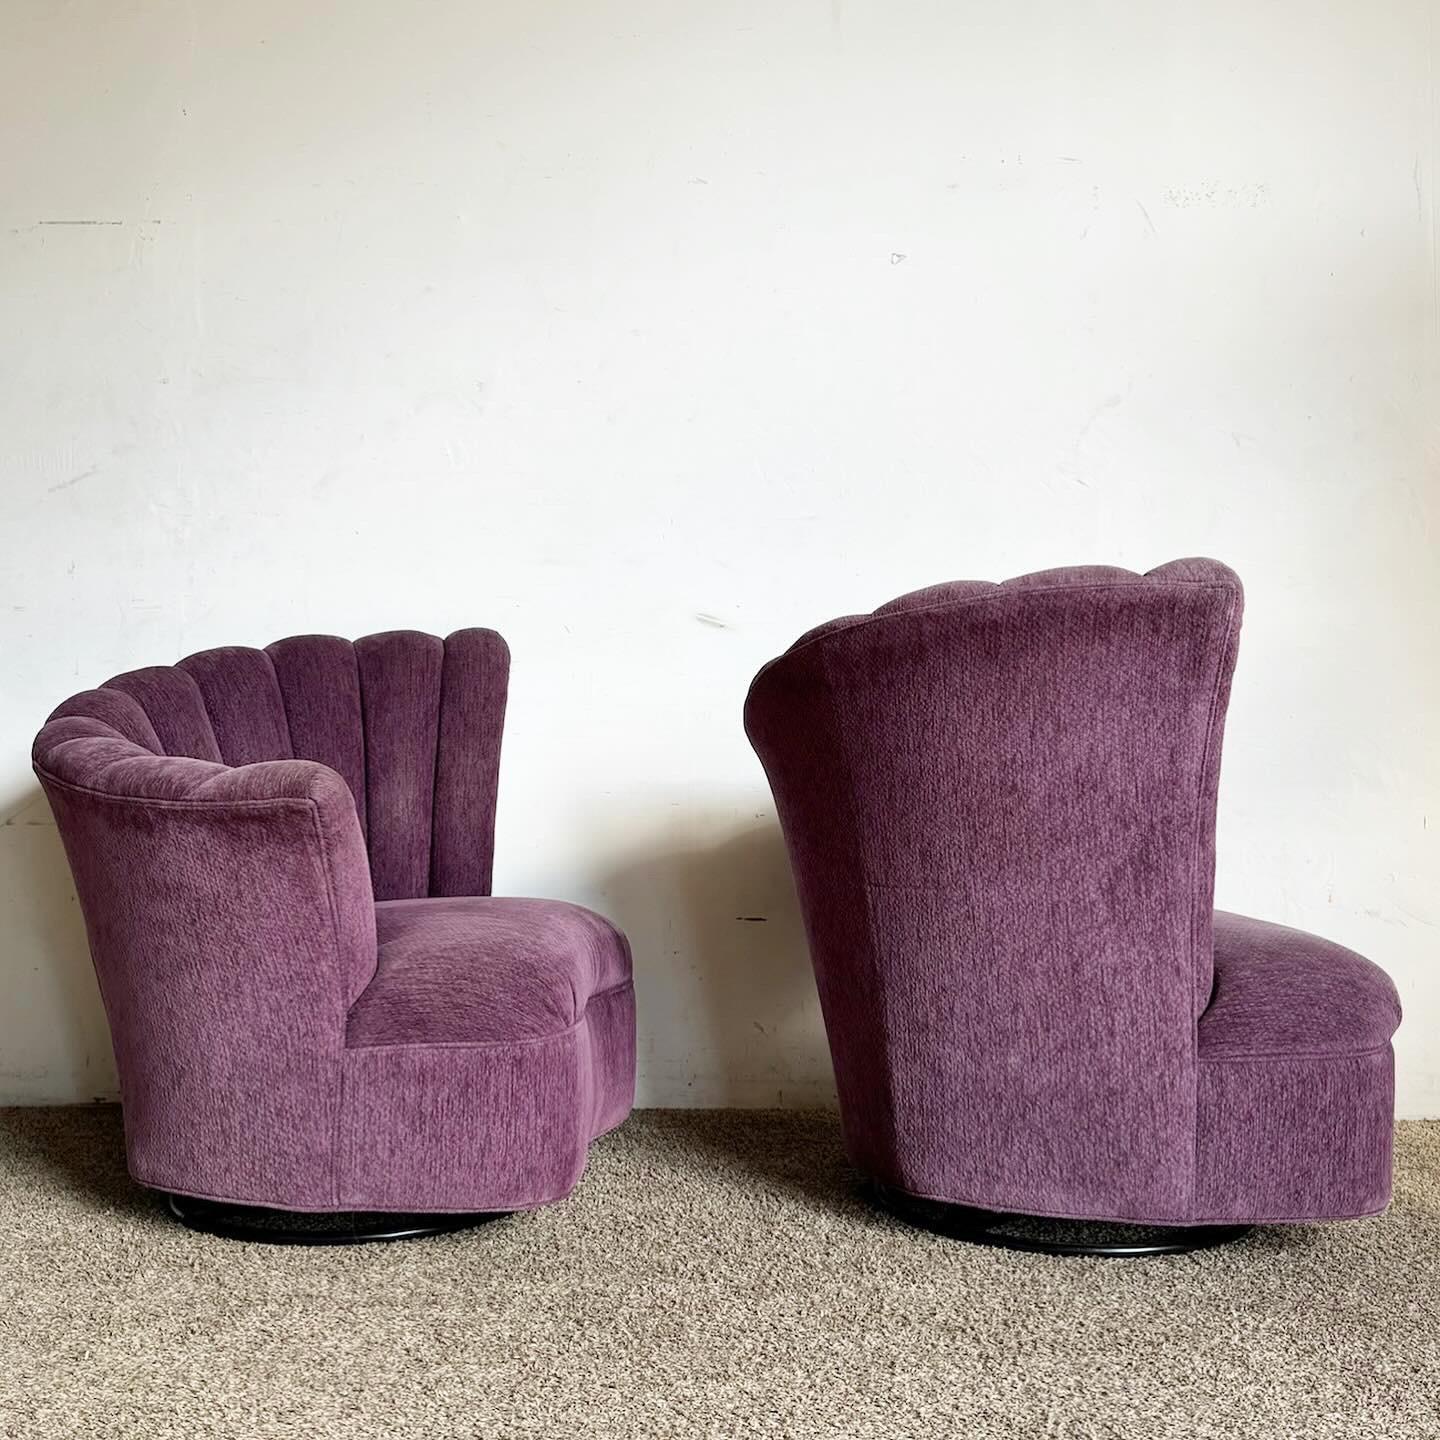 The Postmodern Purple Ascending Clam Shell Back Swivel Chairs, a pair, offer a bold and elegant addition to any space. These chairs showcase a unique clam shell back design, upholstered in vibrant purple fabric, adding dynamic visual appeal. The